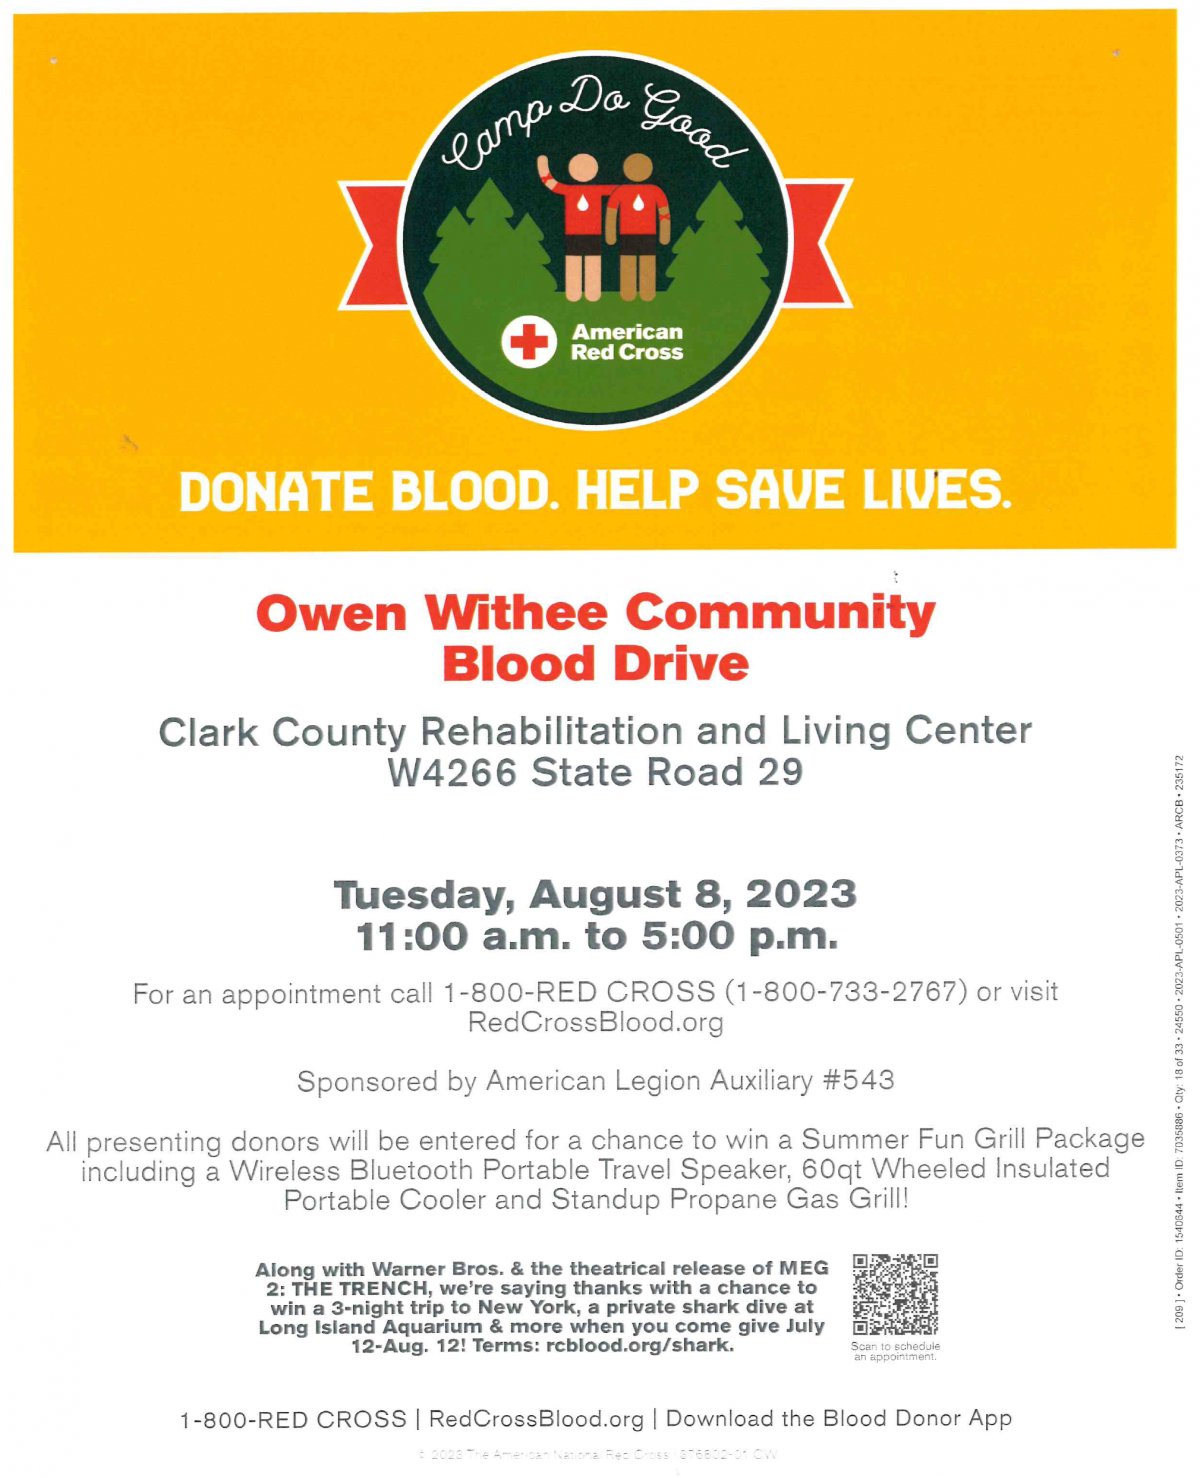 Owen Withee Community Blood Drive